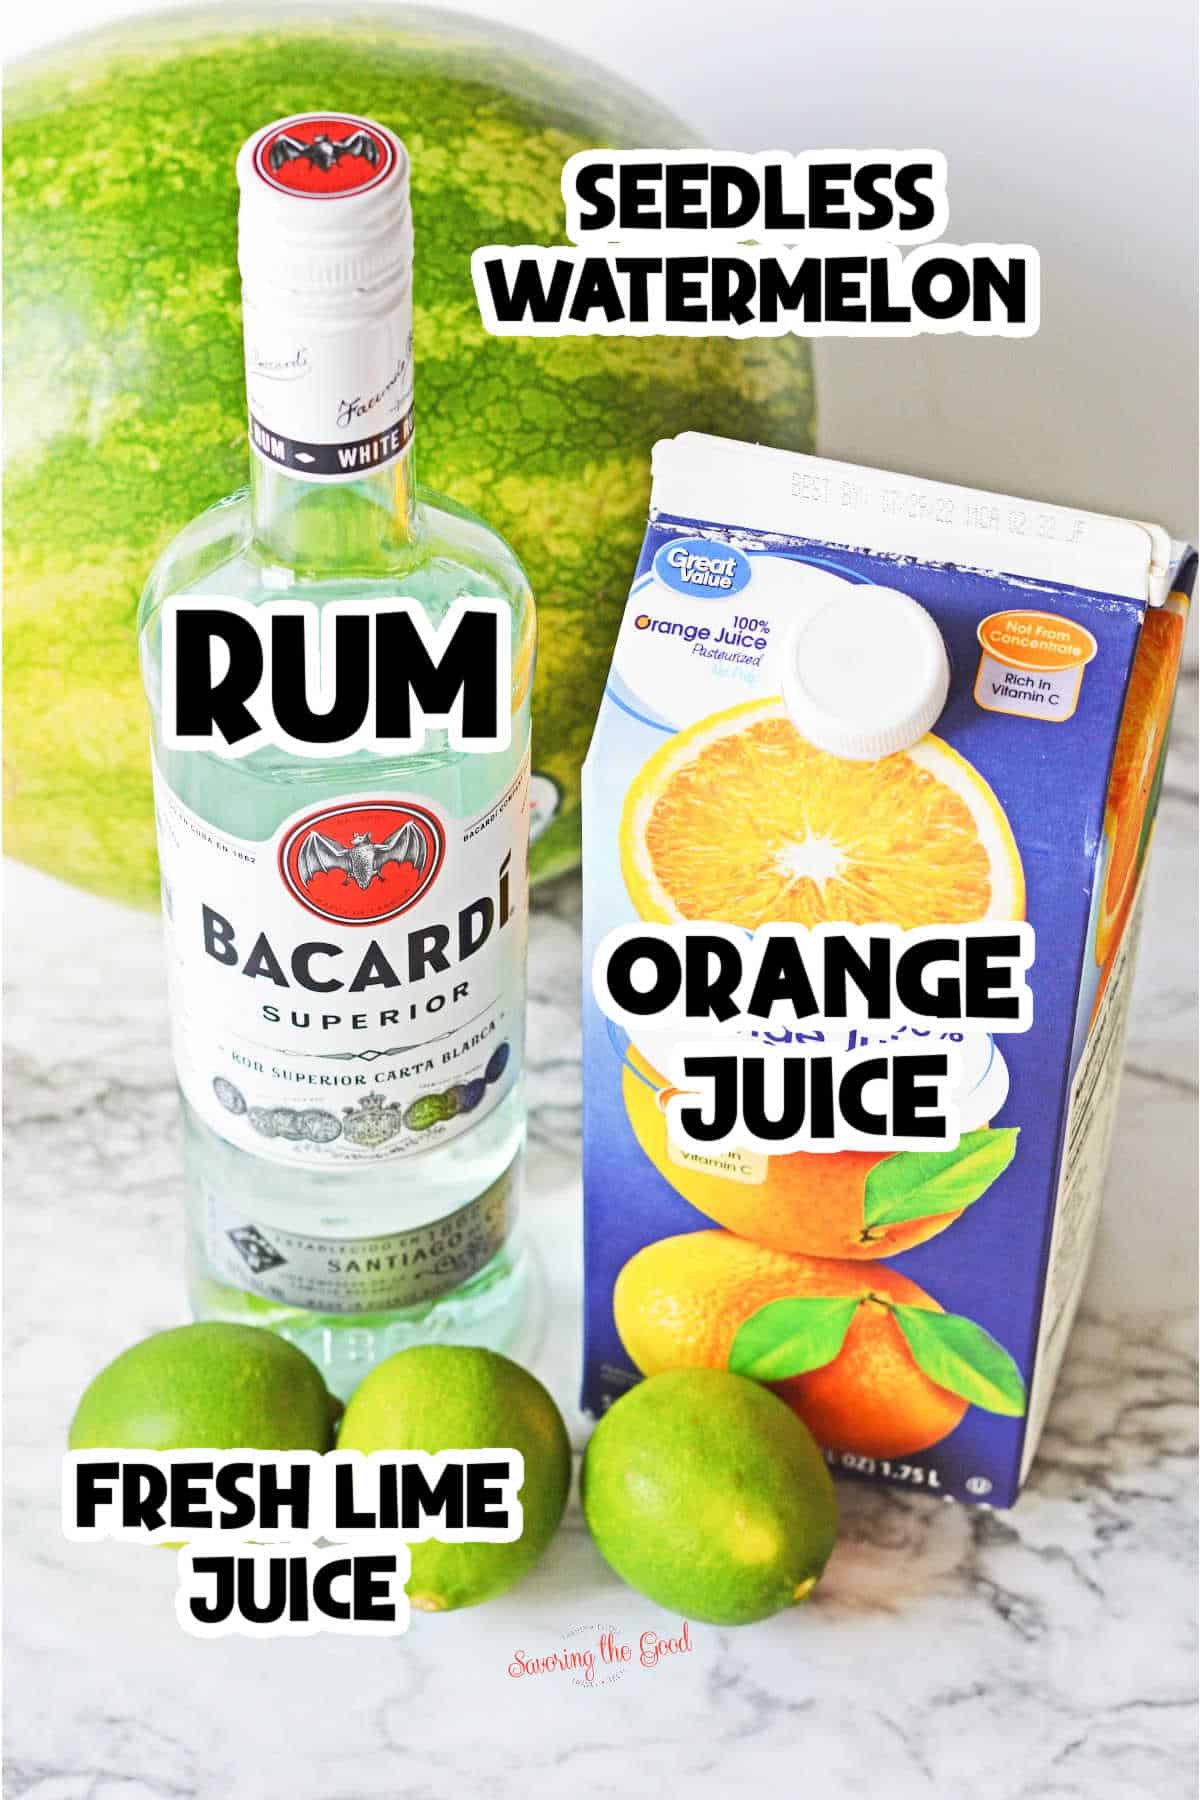 ingredients for Rum Punch with watermelon. bacardi rum, limes for fresh lime juice, orange juice, whole watermelon to be juiced.